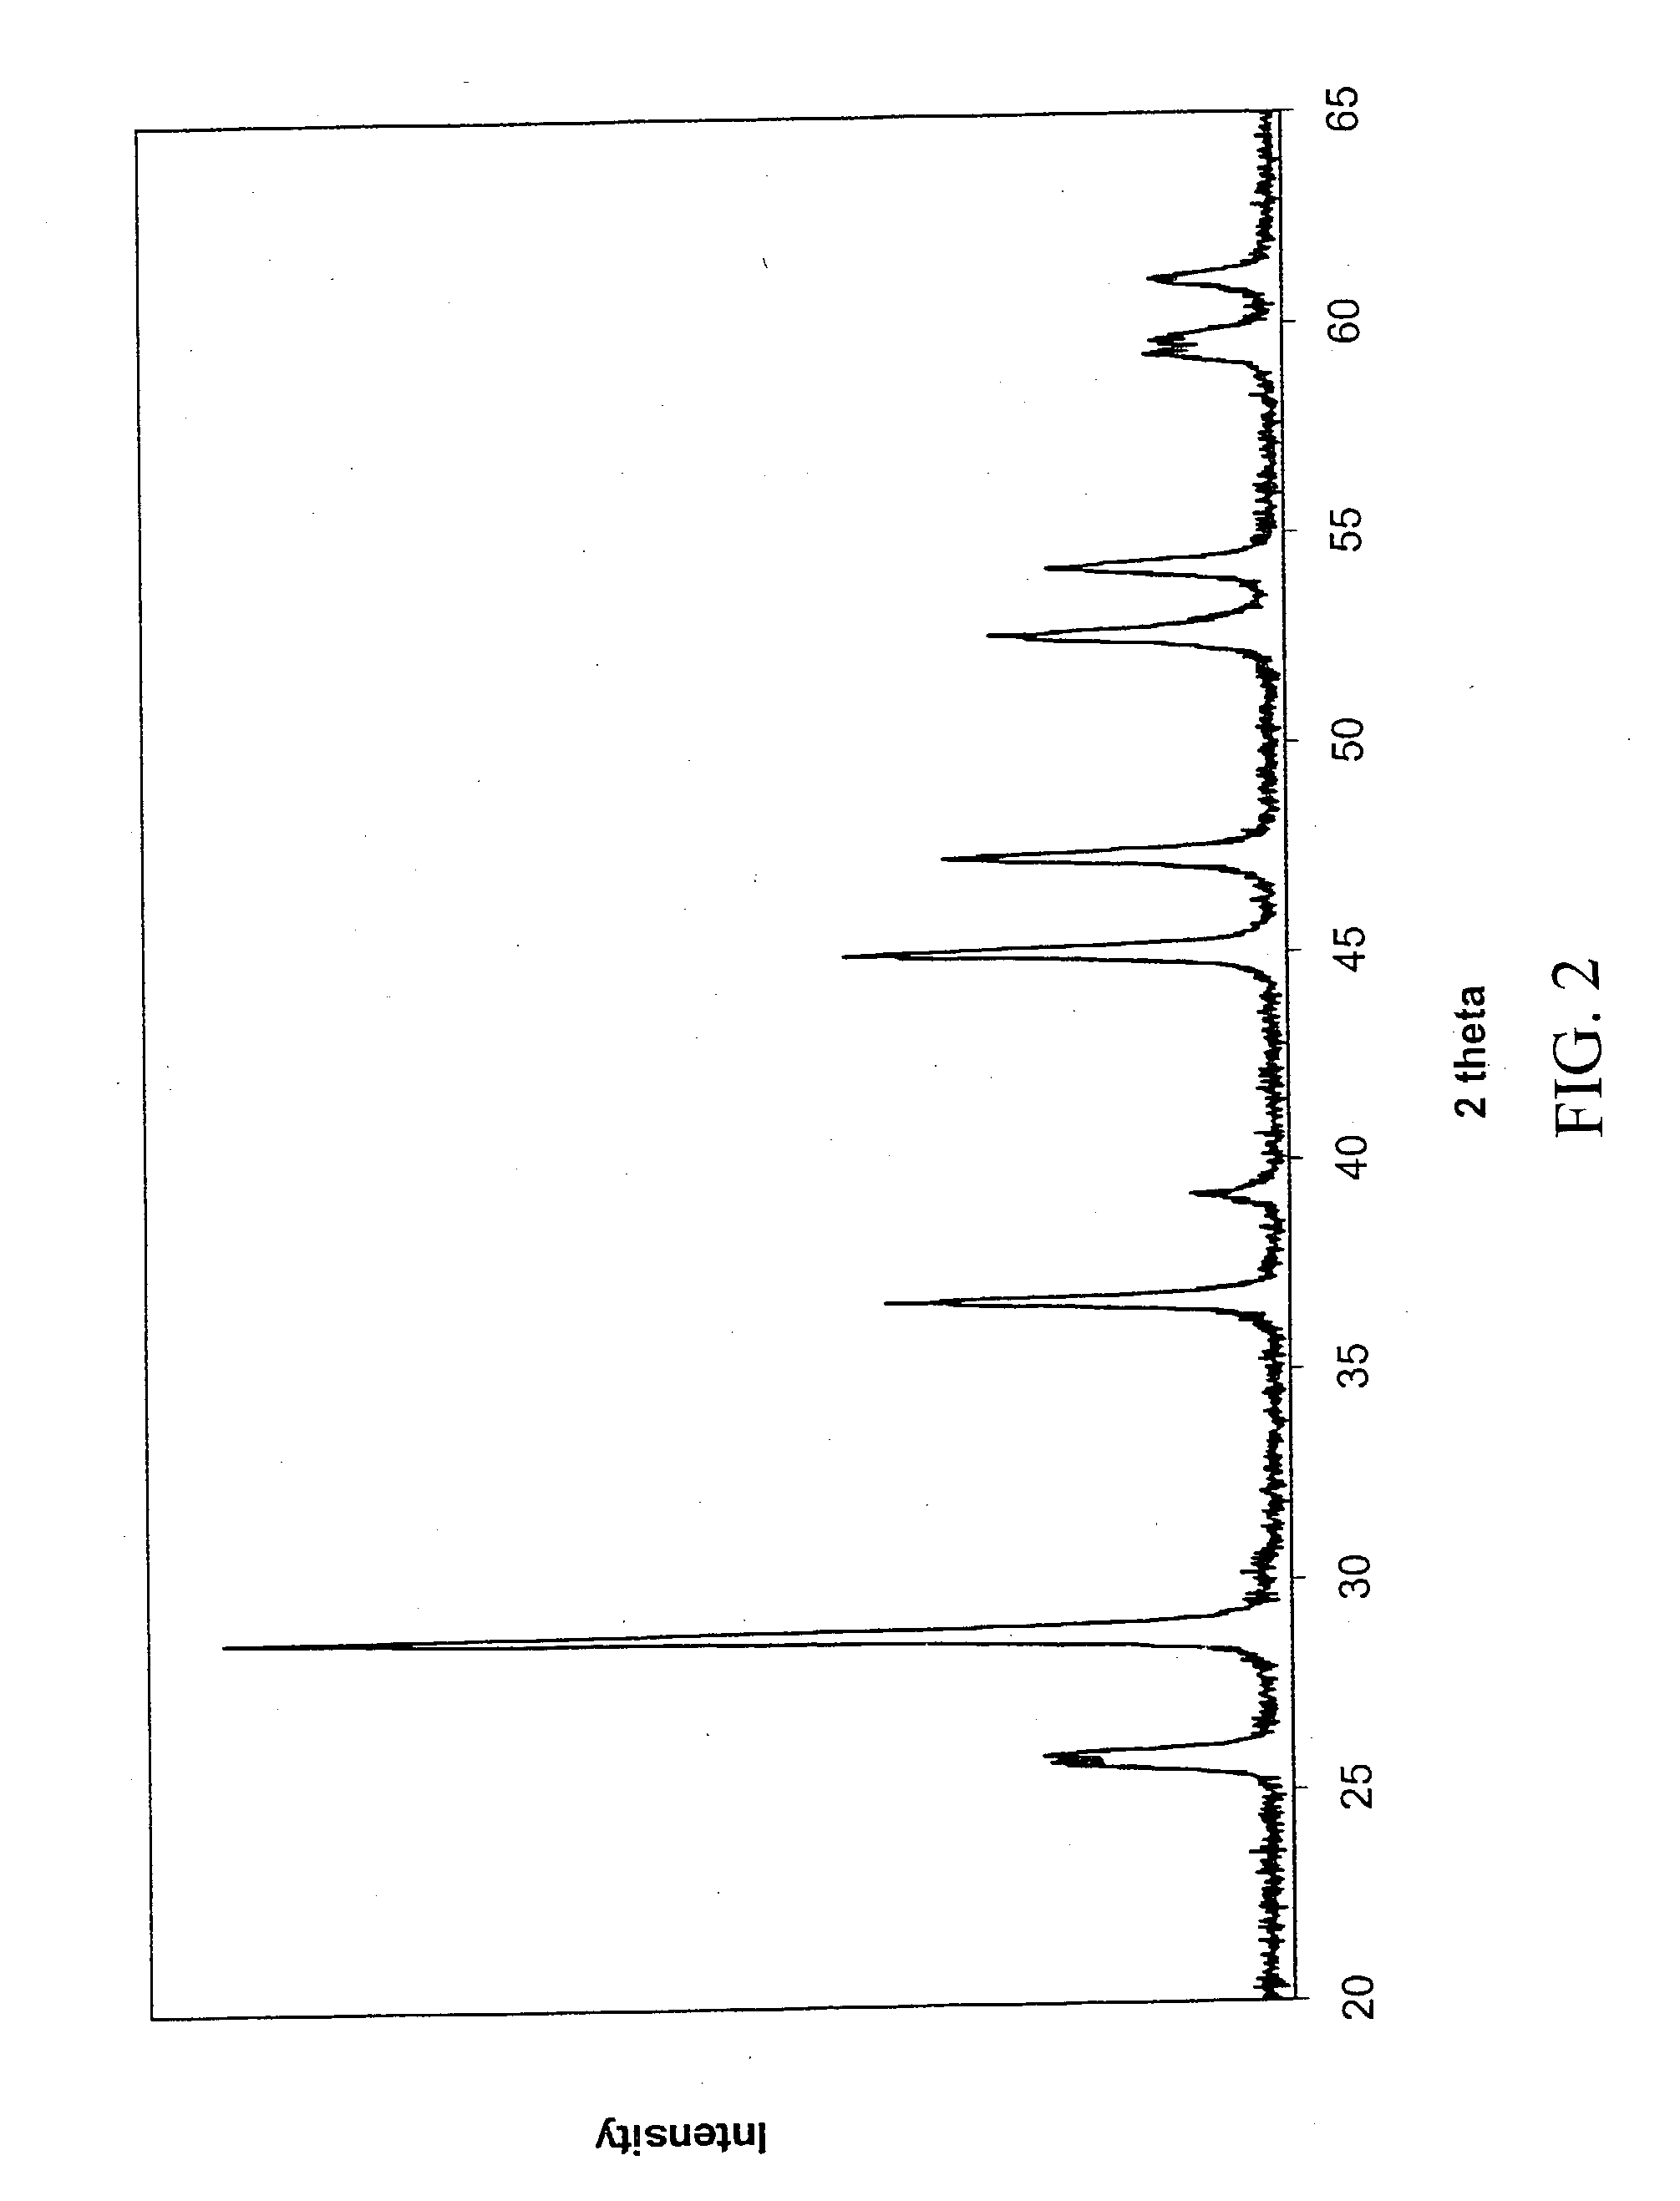 Novel methods for preparing rare-earth oxysulfide phosphors, and resulting materials